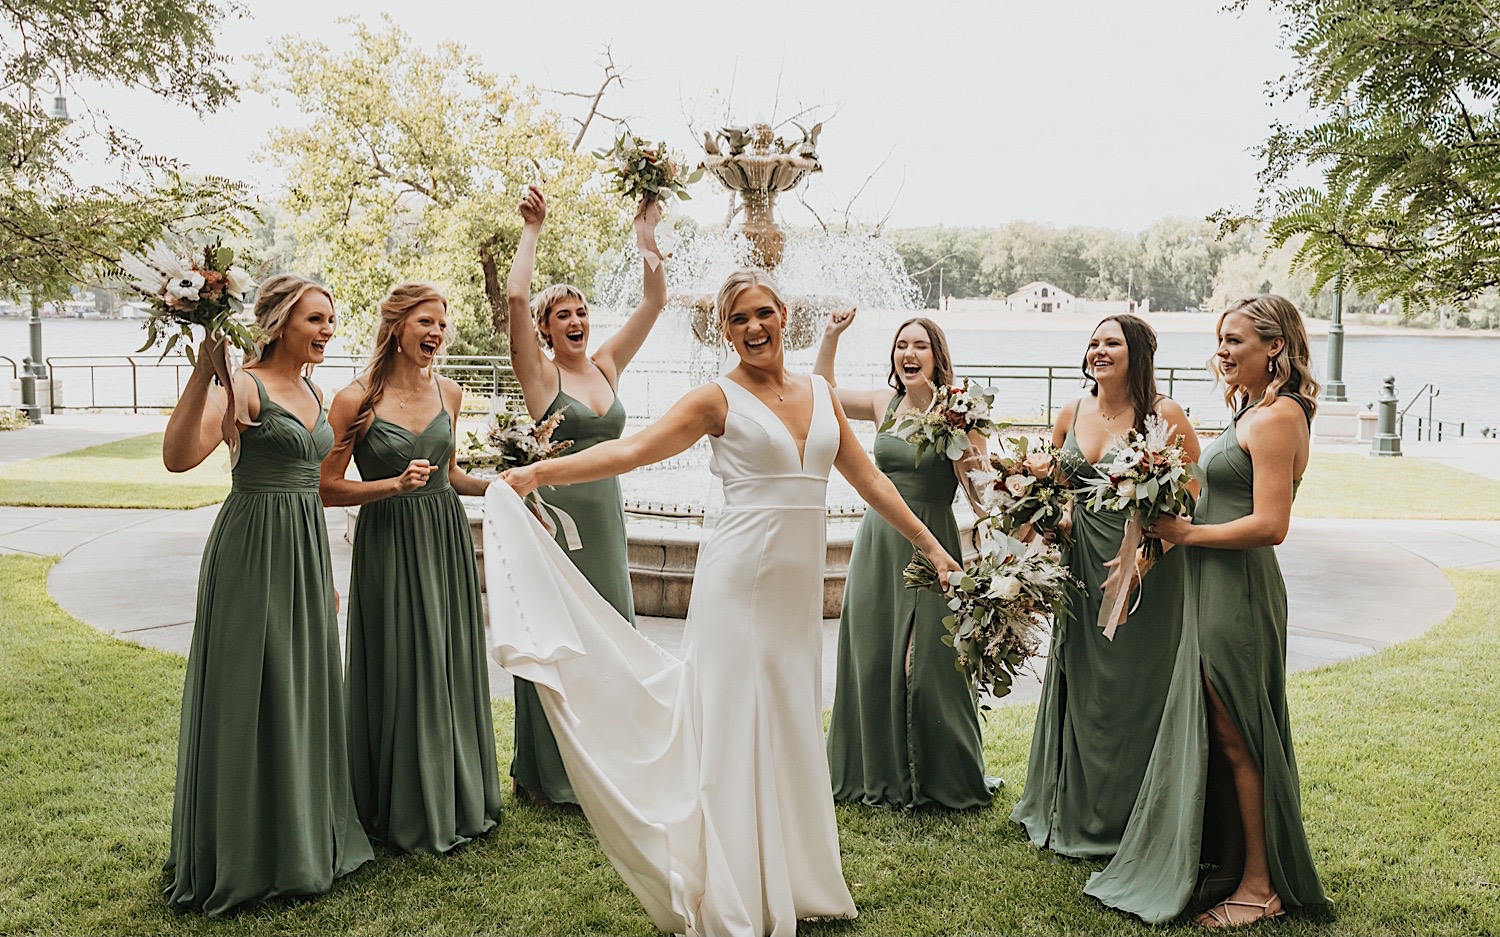 A bride smiles and plays with her dress as her bridesmaids cheer for her in front of a fountain